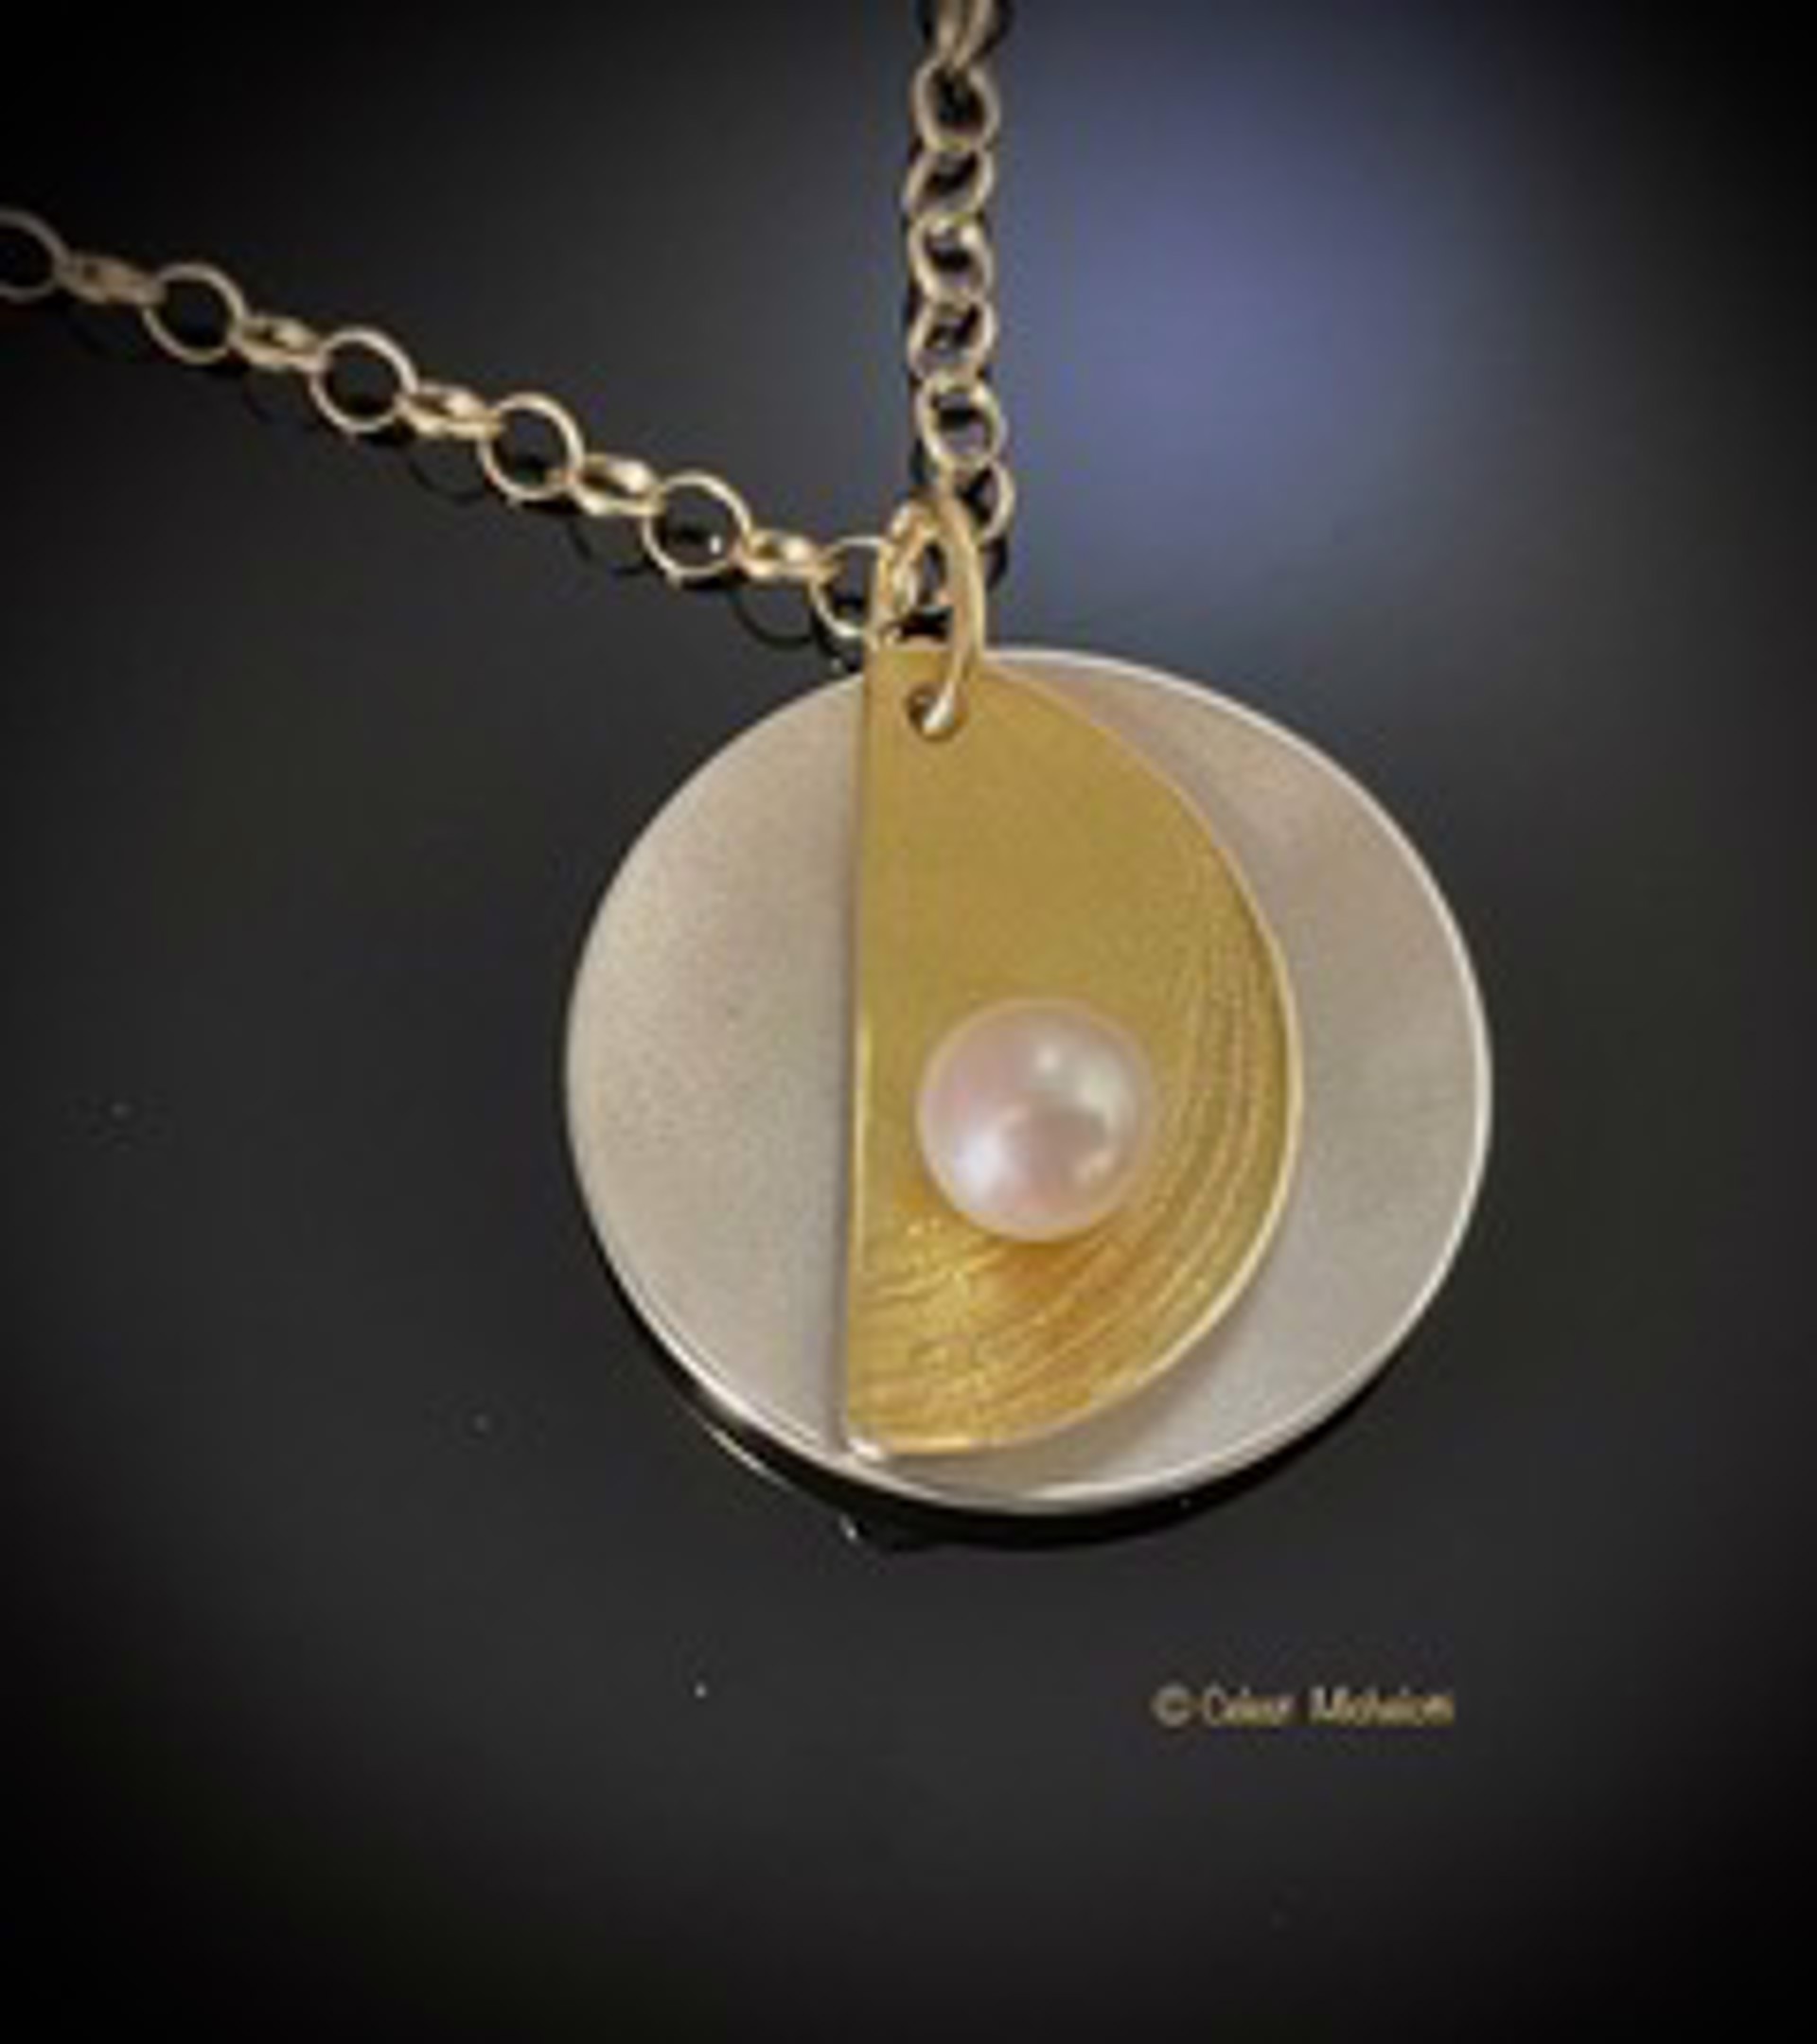 Luna Half Moon Necklace with White Pearl by Celest Michelotti